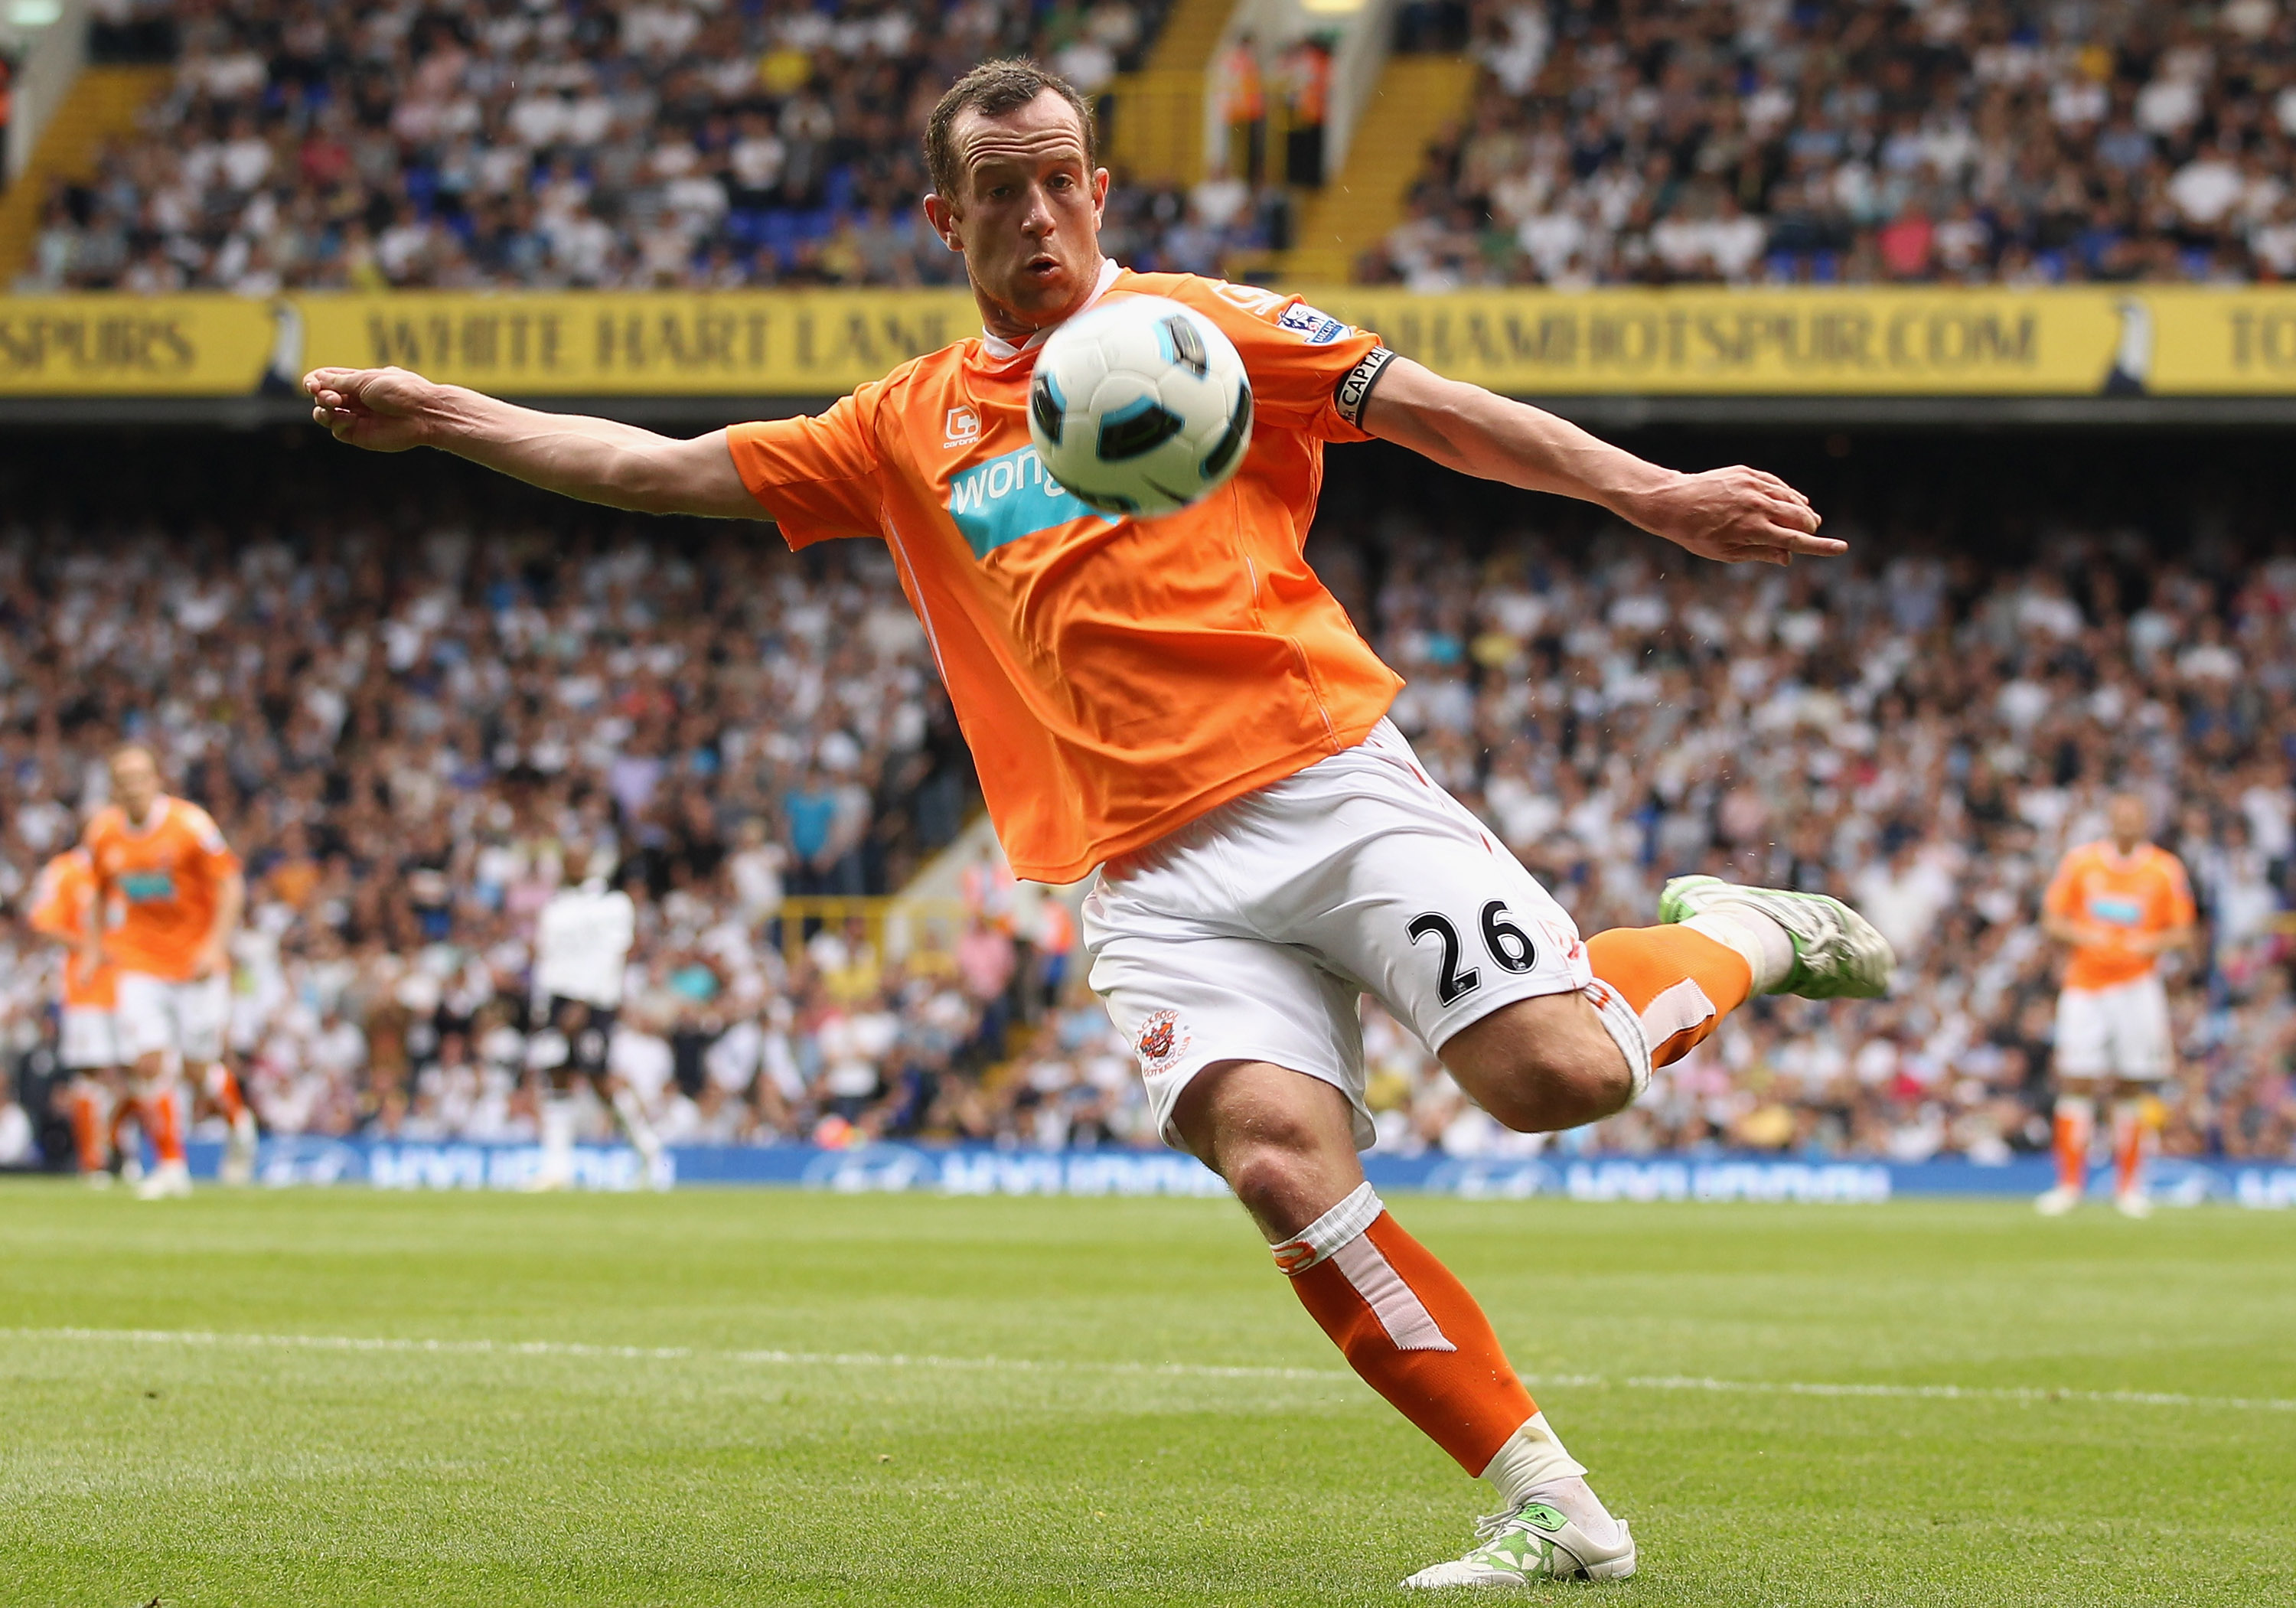 LONDON, UNITED KINGDOM - MAY 07:  Charlie Adam of Blackpool on the ball during the Barclays Premier League match between Tottenham Hotspur and Blackpool at White Hart Lane on May 7, 2011 in London, England.  (Photo by Scott Heavey/Getty Images)